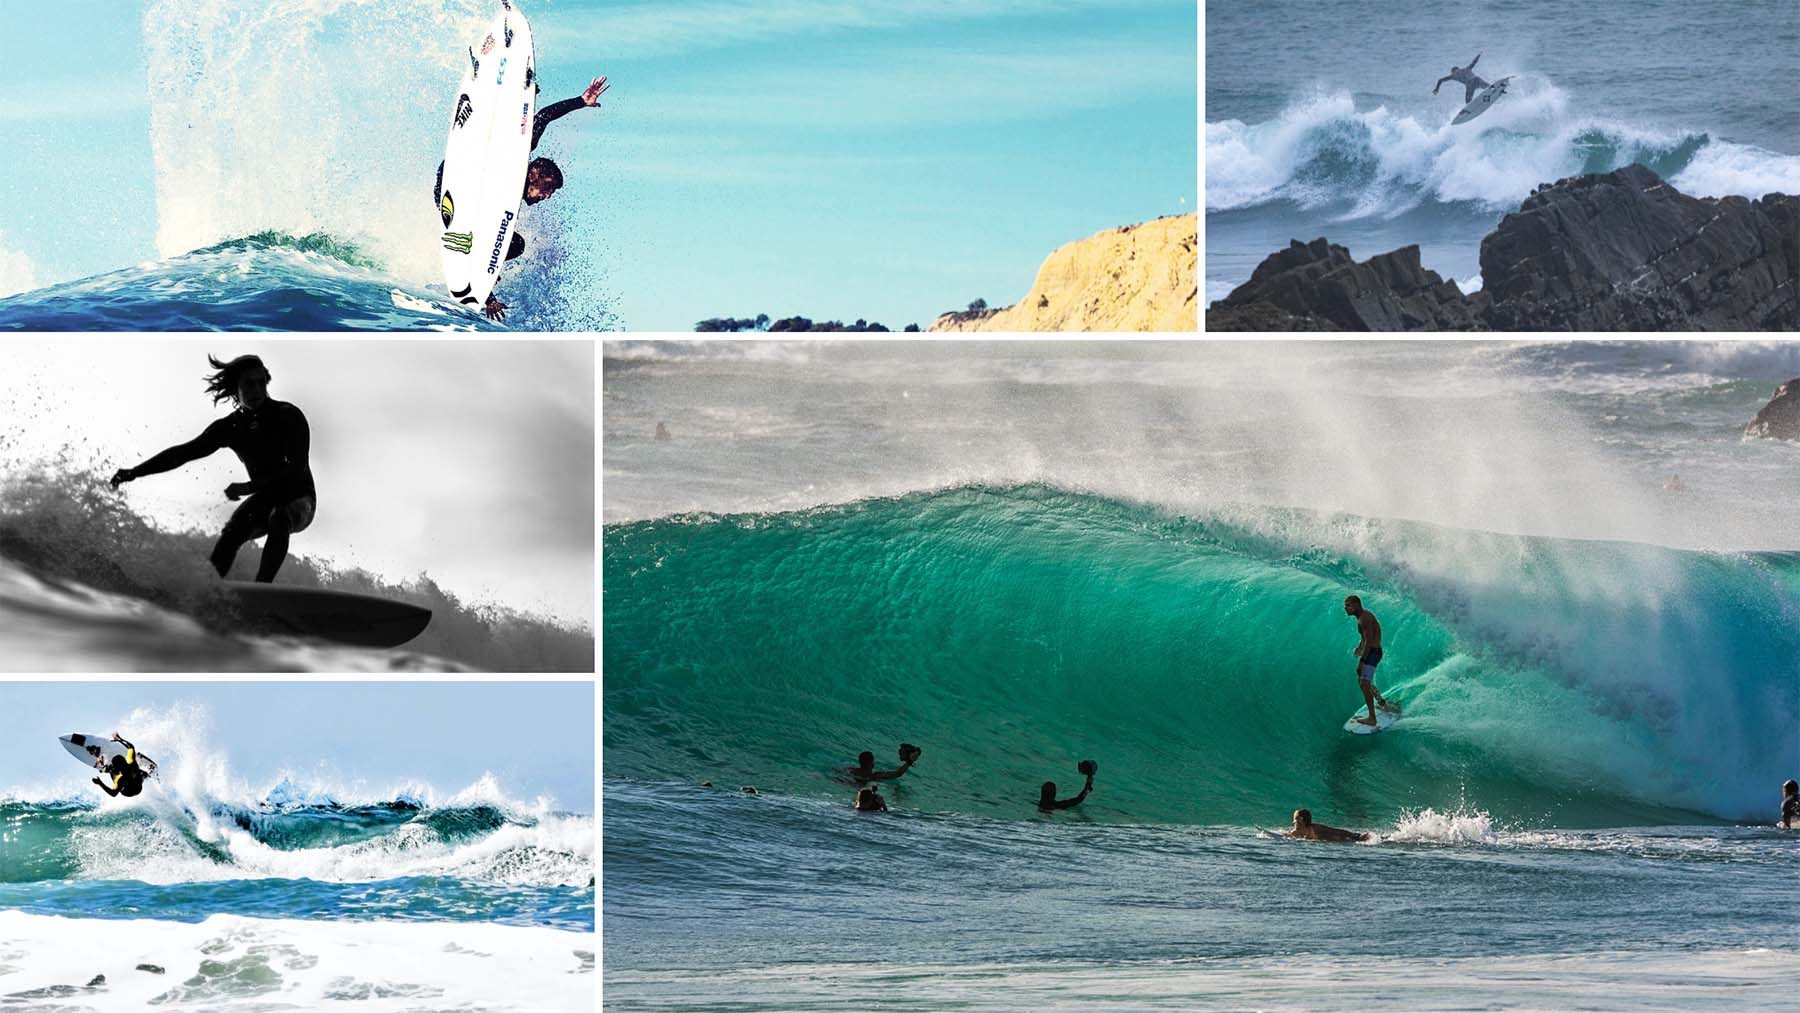 Surfing hacks: The top 9 every surfer needs to know